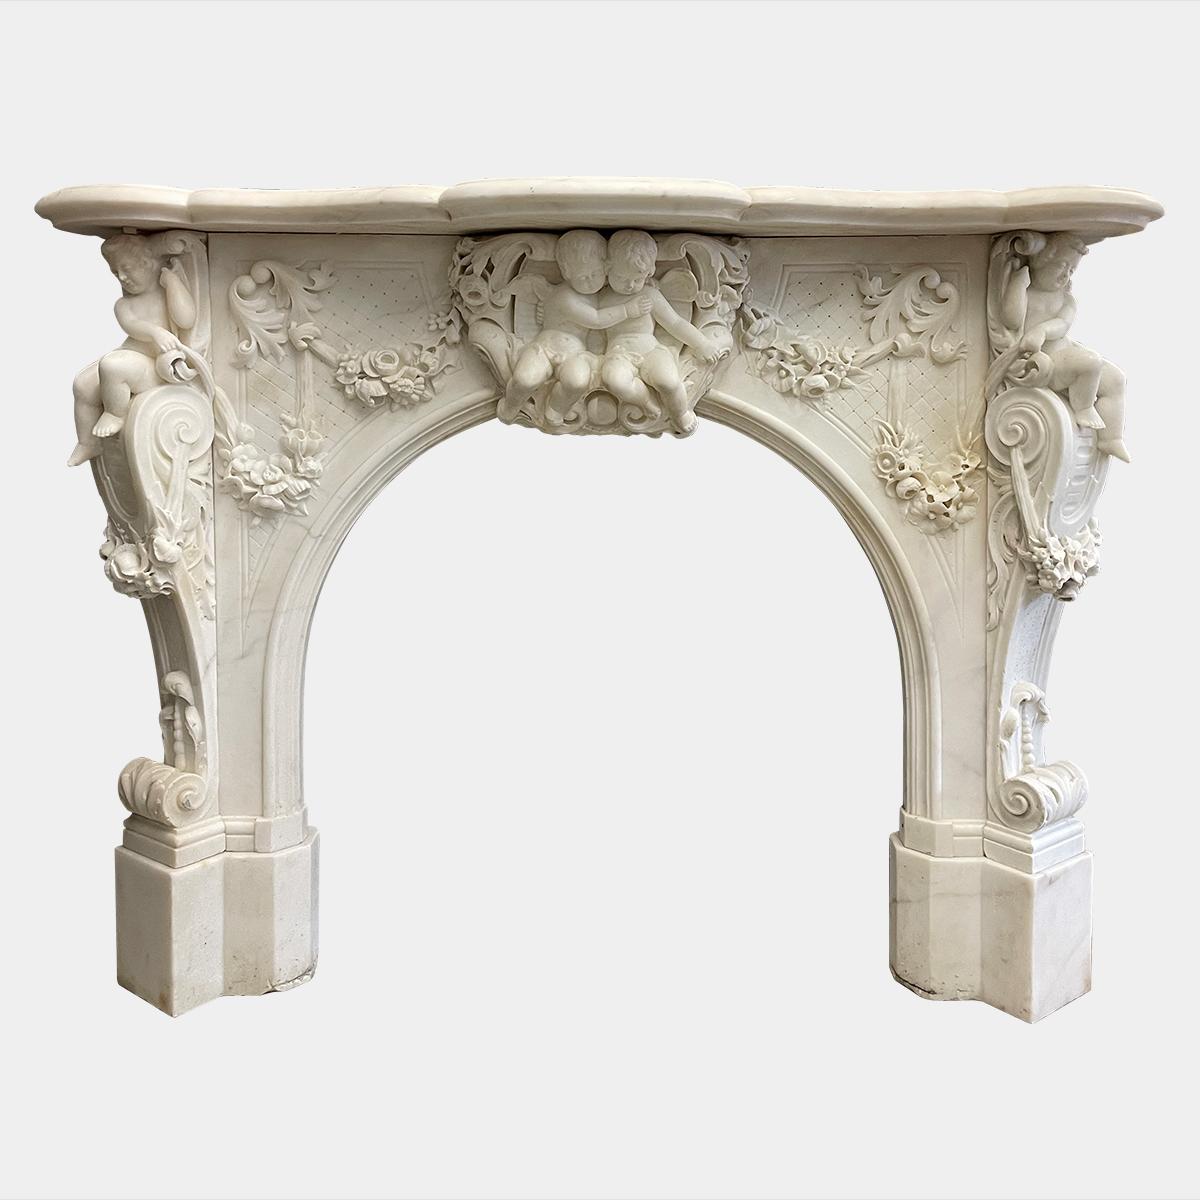 Statuary Marble Antique Italian Statuary White Marble Baroque Style Fireplace Mantel For Sale